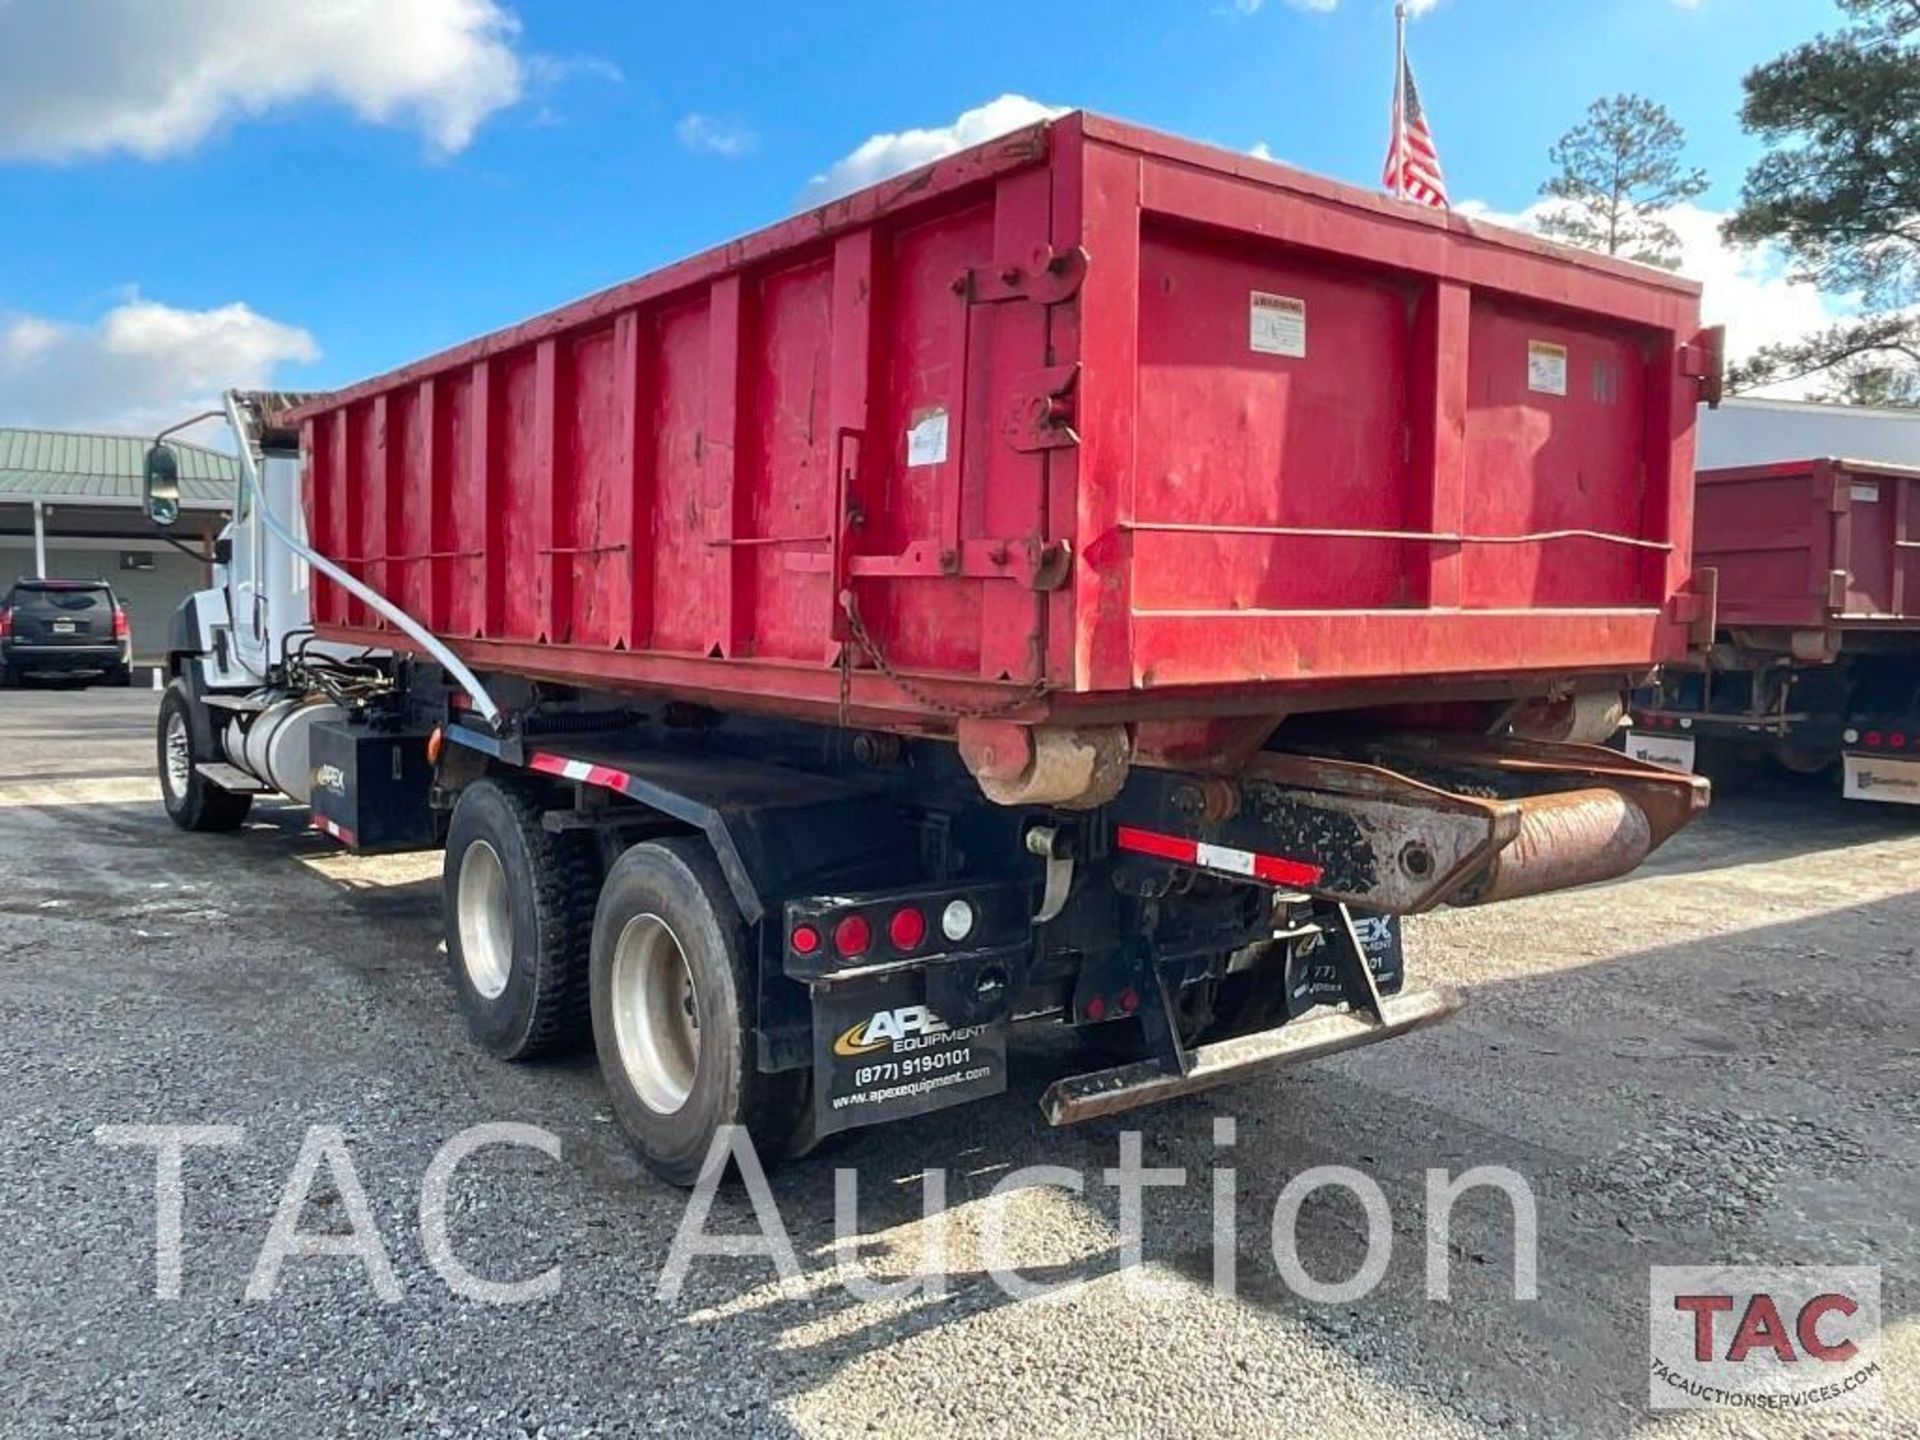 2012 CAT CT660S Roll-Off Truck W/ 20yd Dumpster - Image 10 of 148